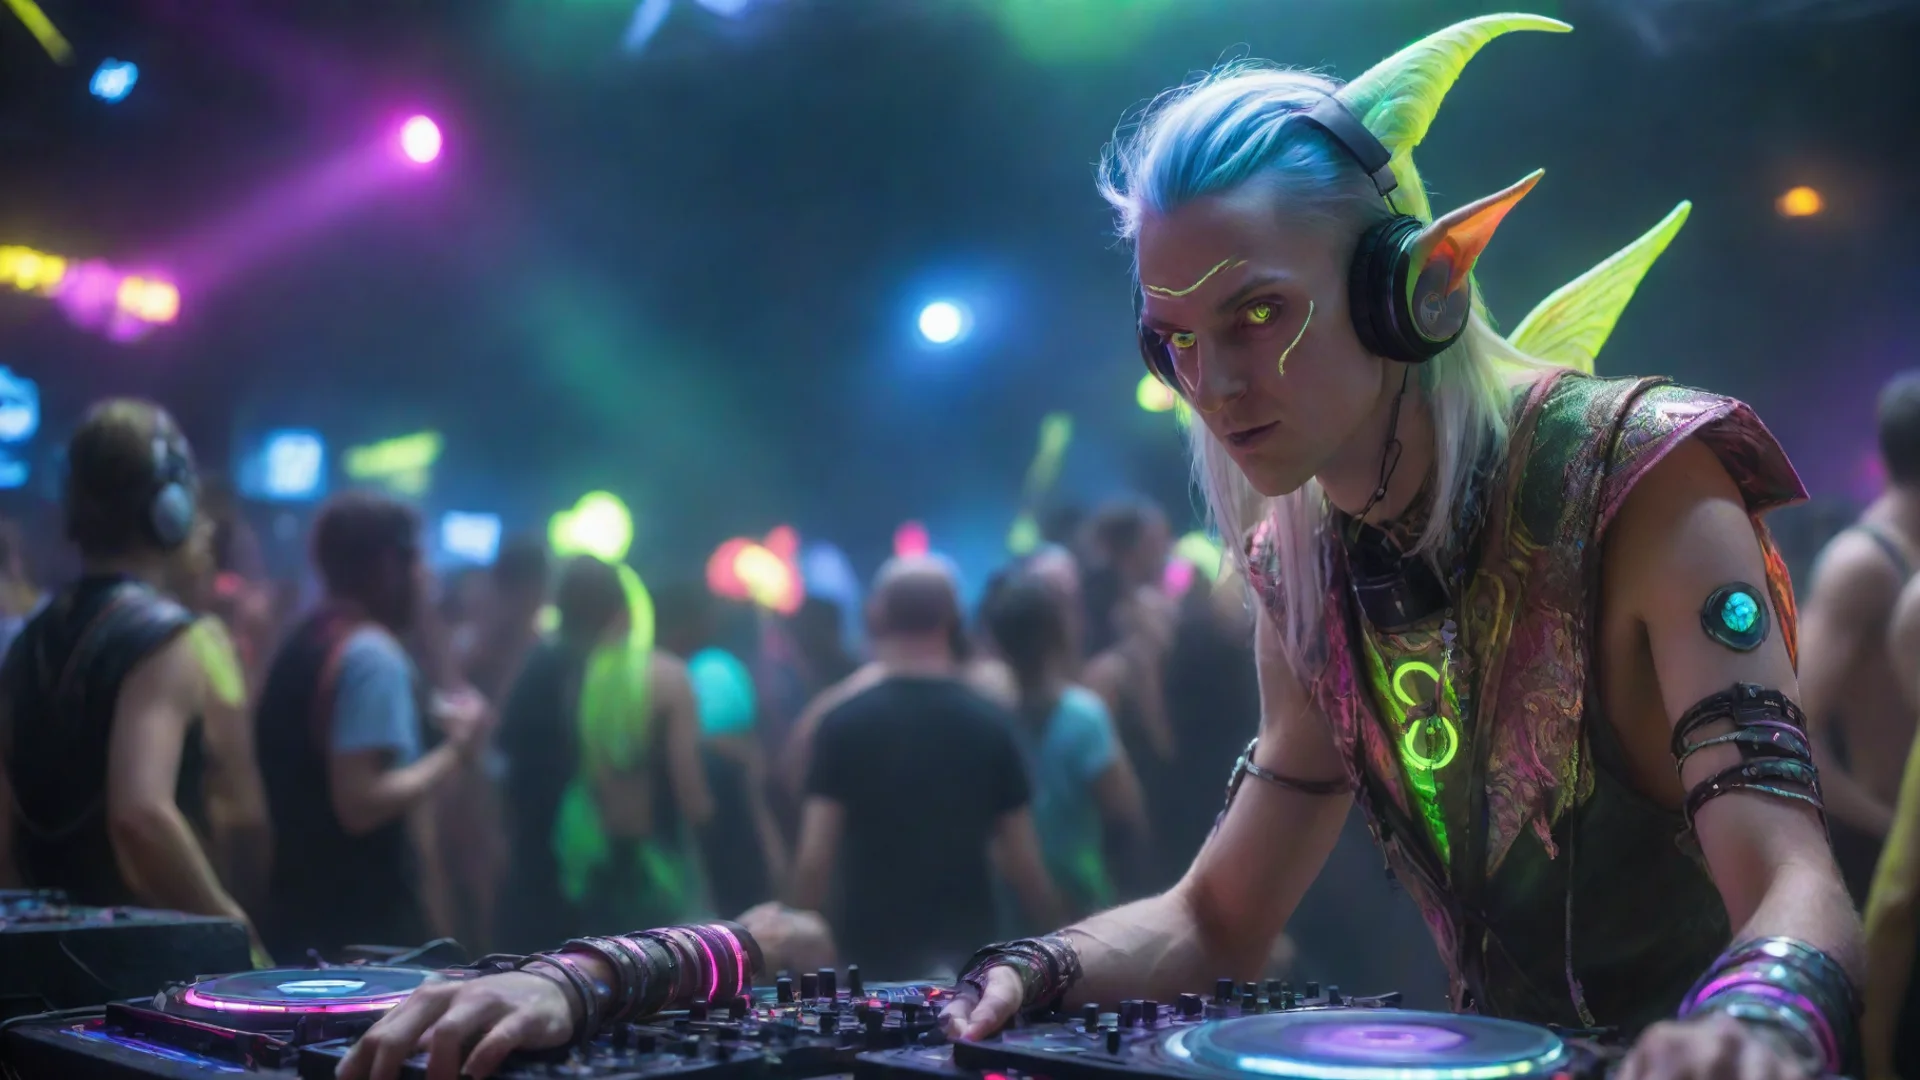 aitrending high elf dj at a rave with lots of fluorescent elements good looking fantastic 1 wide